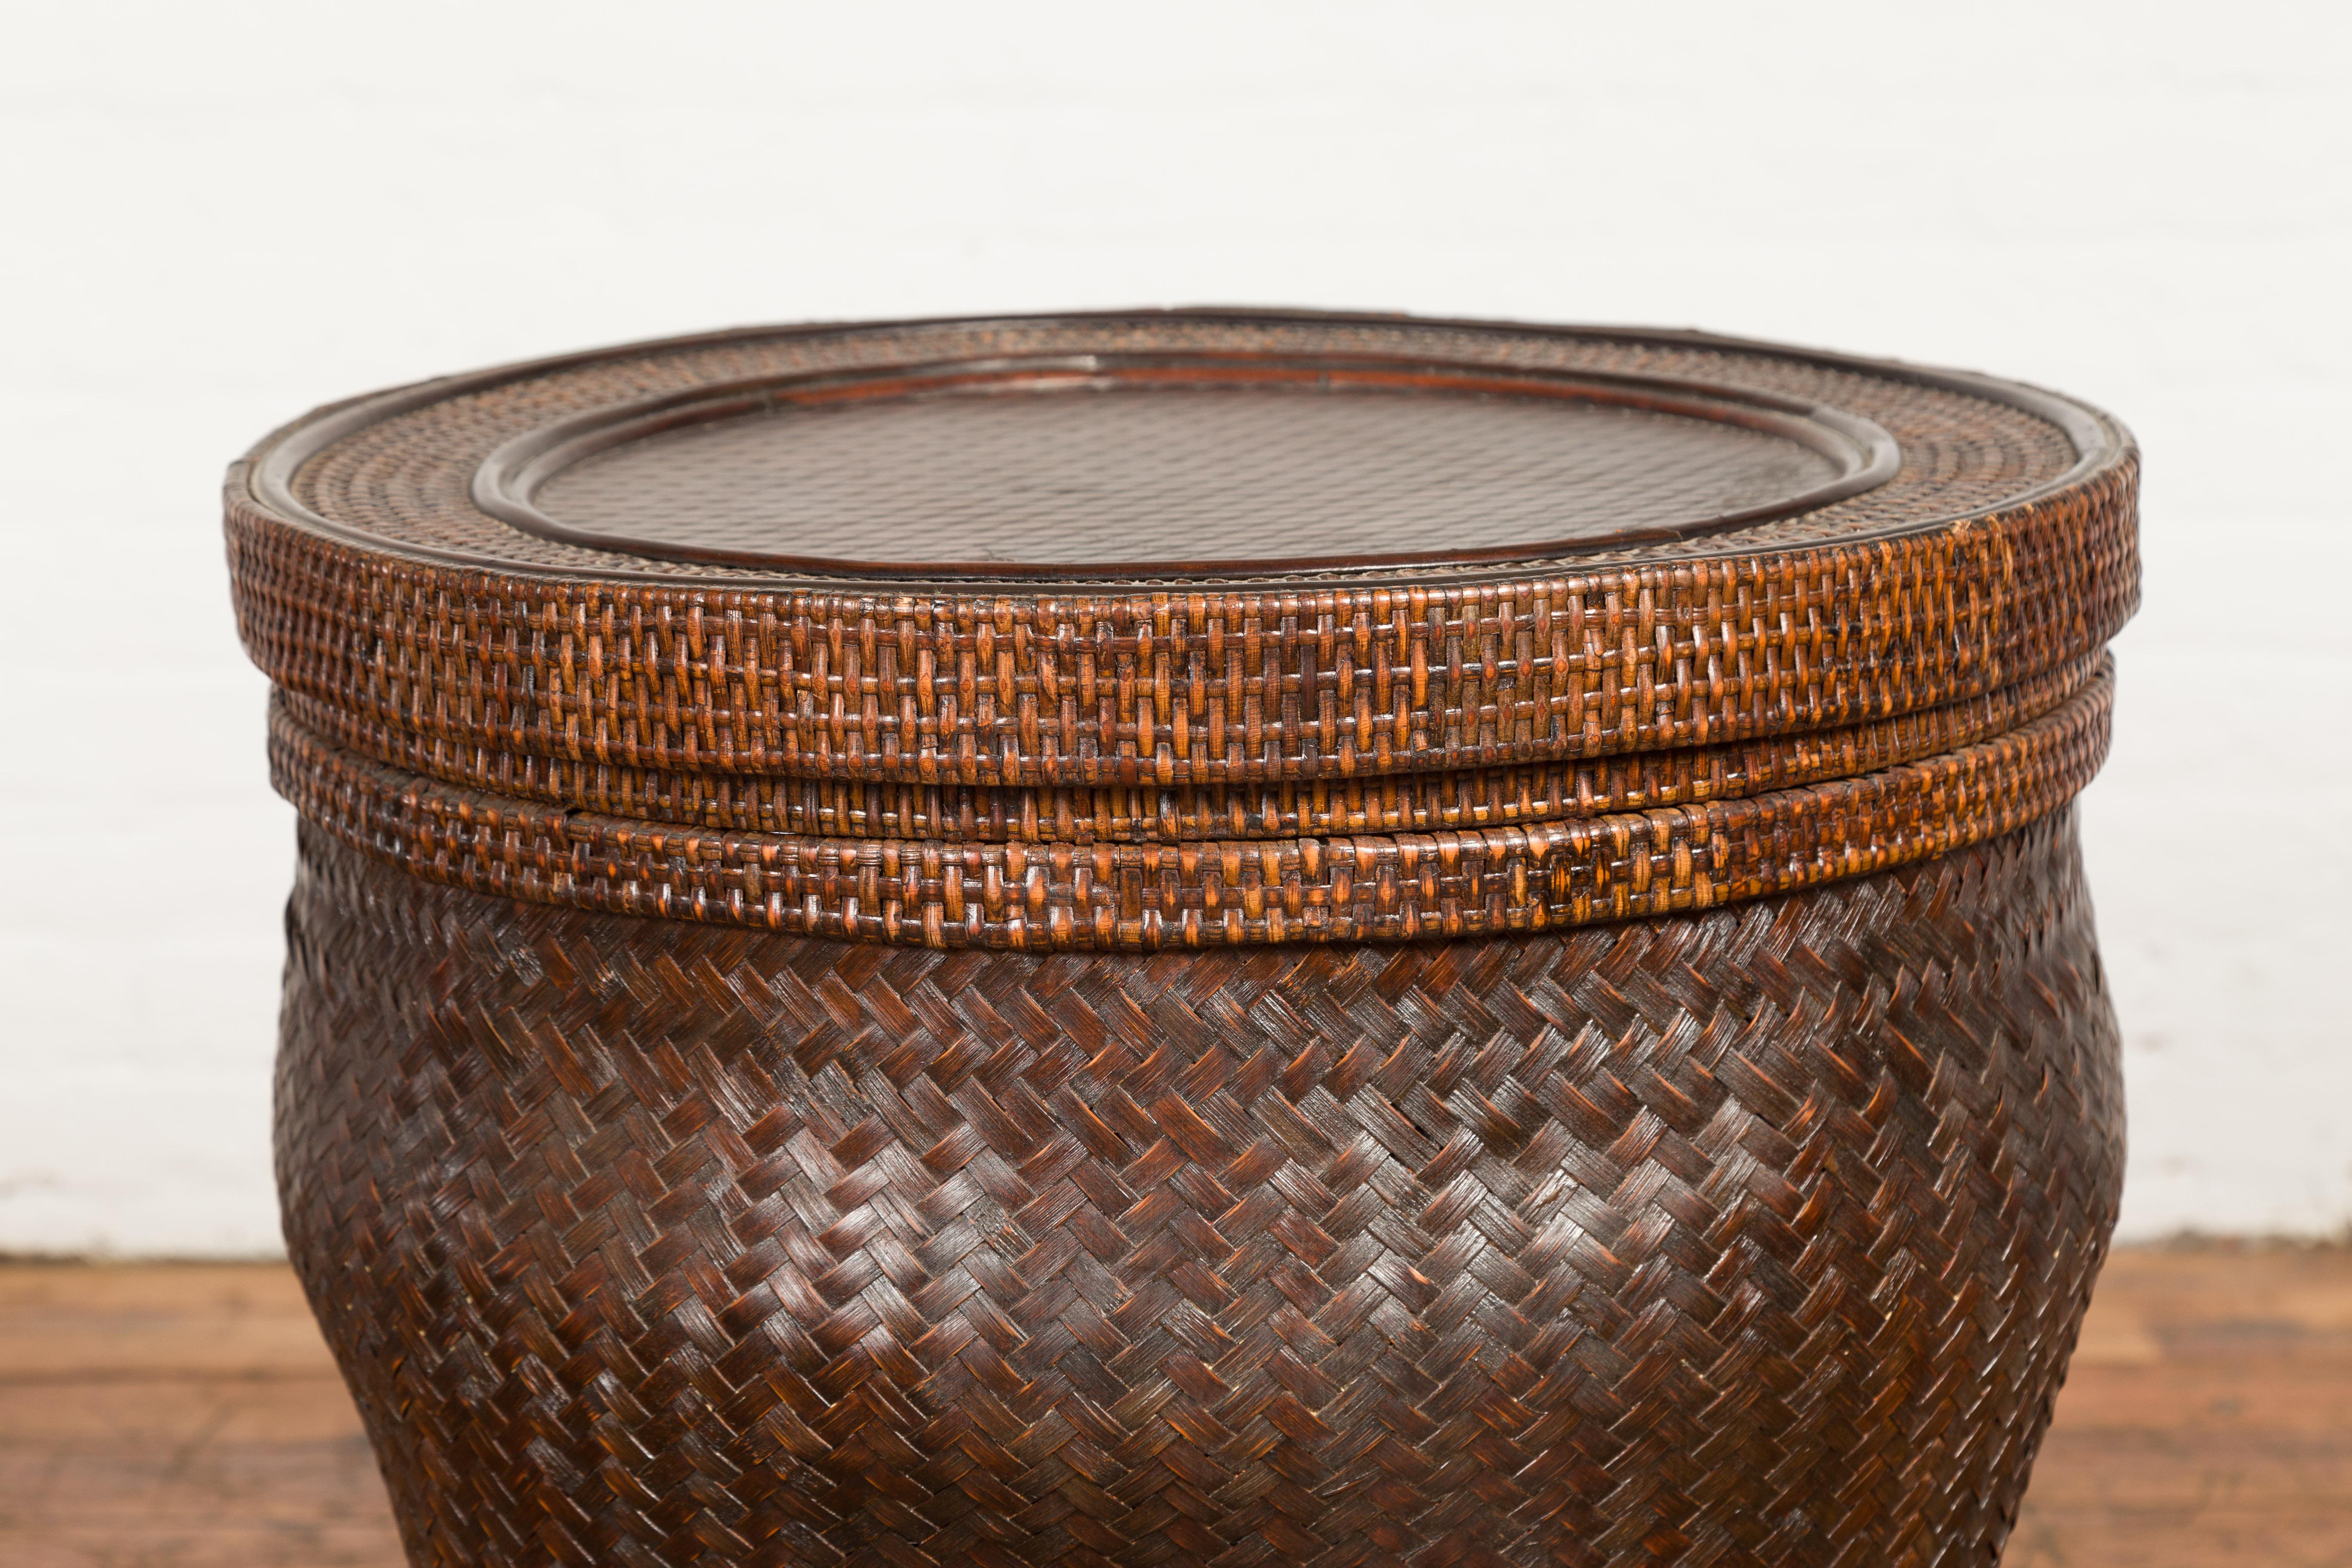 20th Century Vintage Thai Hand-Woven Rattan and Bamboo Storage Basket with Brown Patina